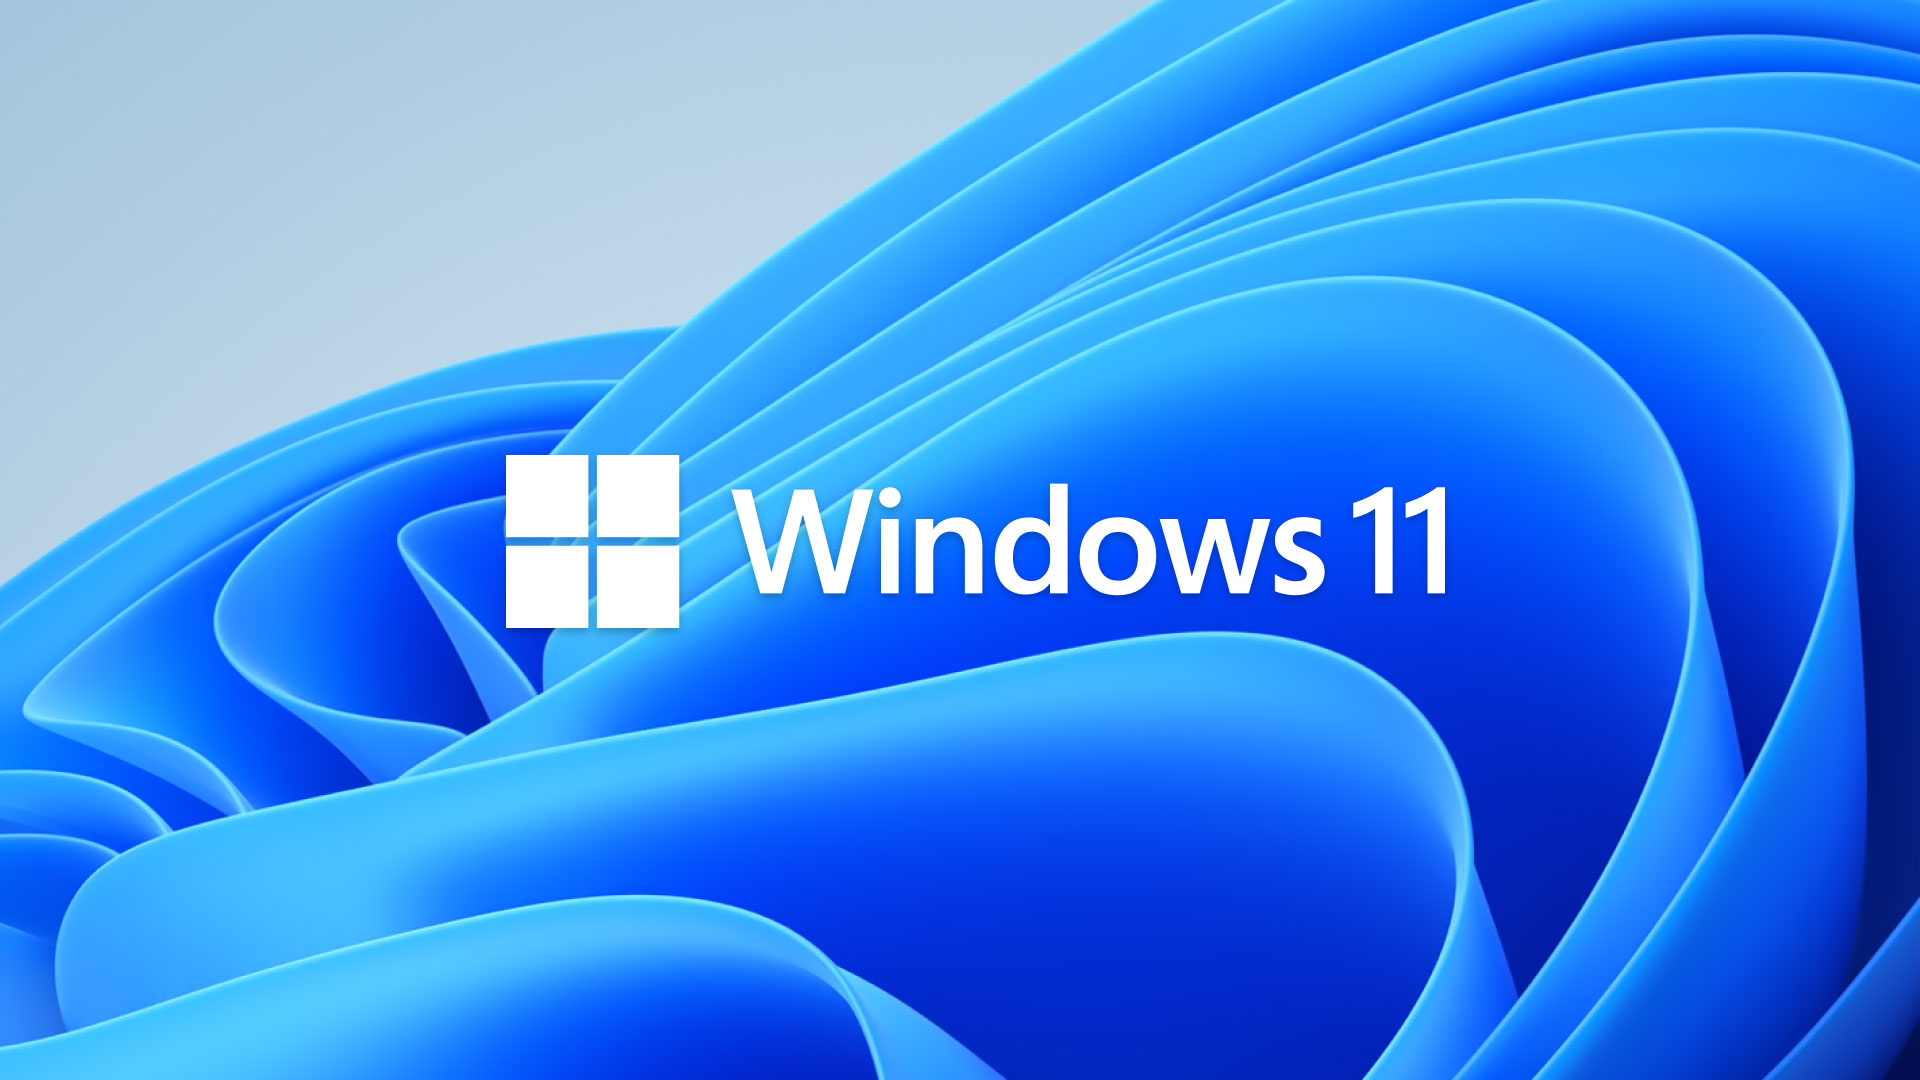 Do you have to download windows 11 12 imam life in urdu free download pdf